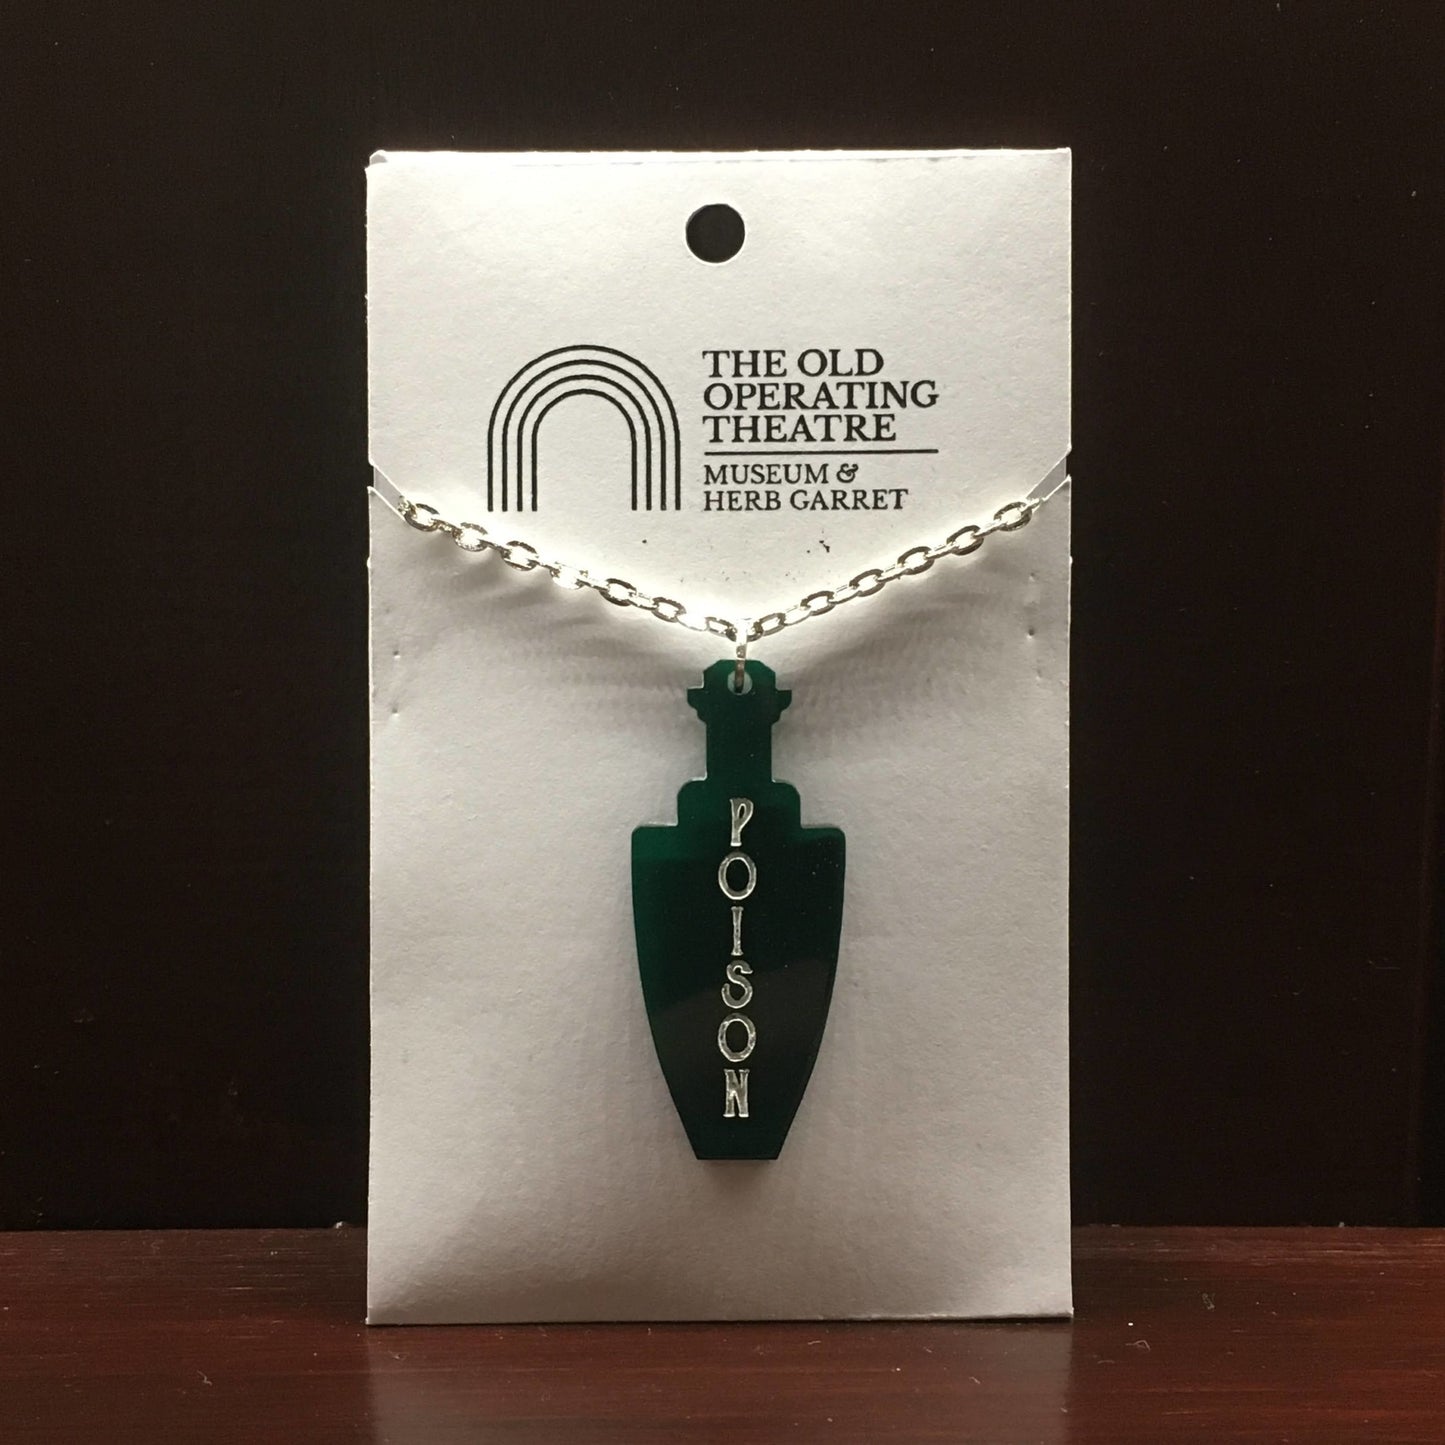 Green pendant in the shape of a bottle, with 'poison' written vertically on the front. On a metal chain.